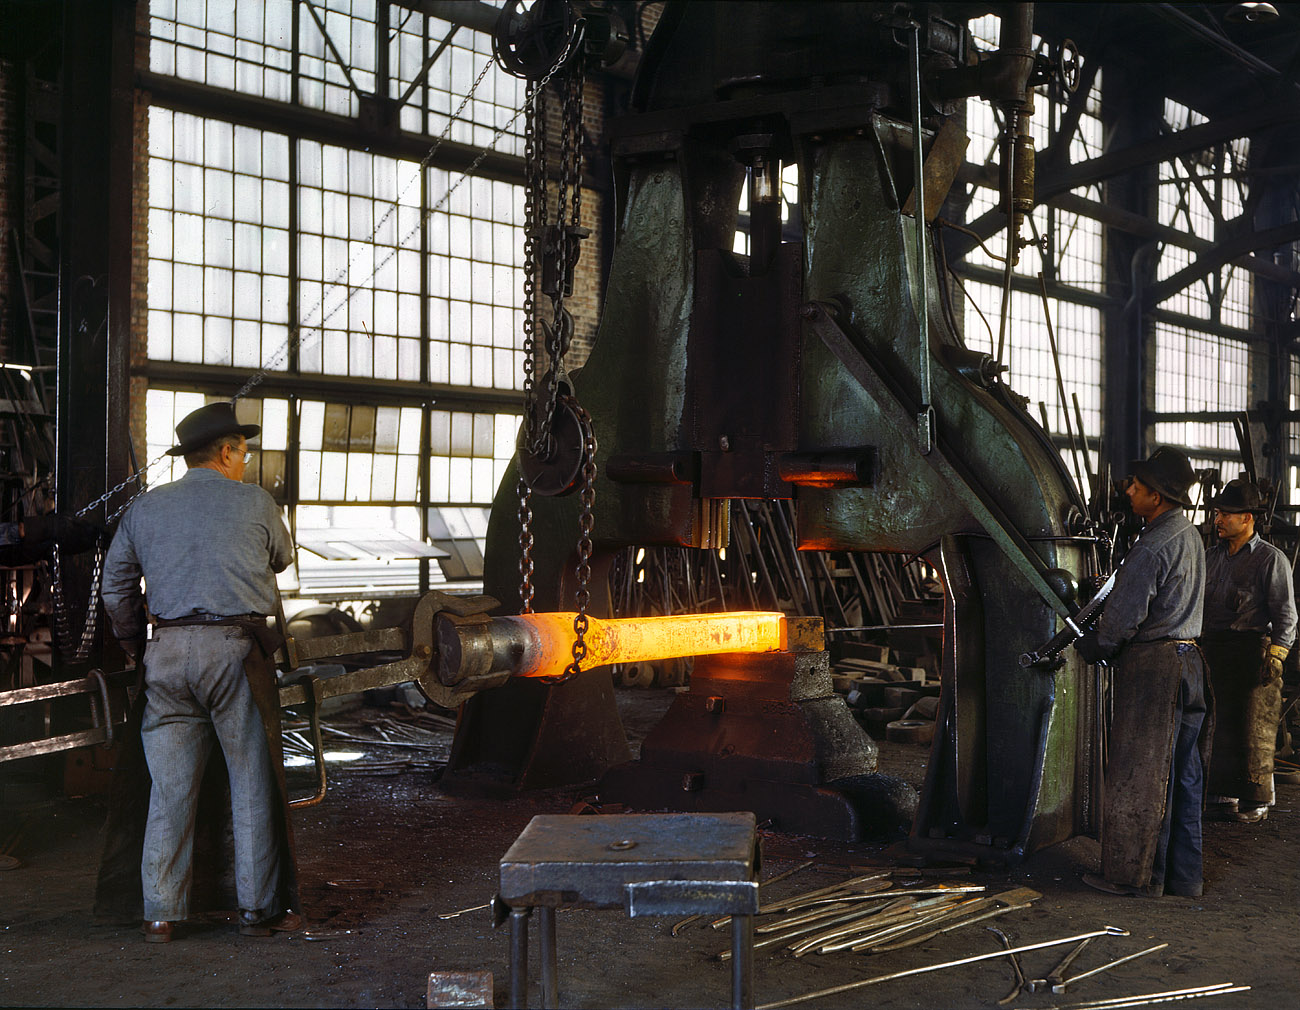 March 1943. "Santa Fe R.R. shops, Albuquerque. Hammering out a drawbar on the steam drop hammer in the blacksmith shop." 4x5 Kodachrome transparency by Jack Delano for the Office of War Information. View full size.